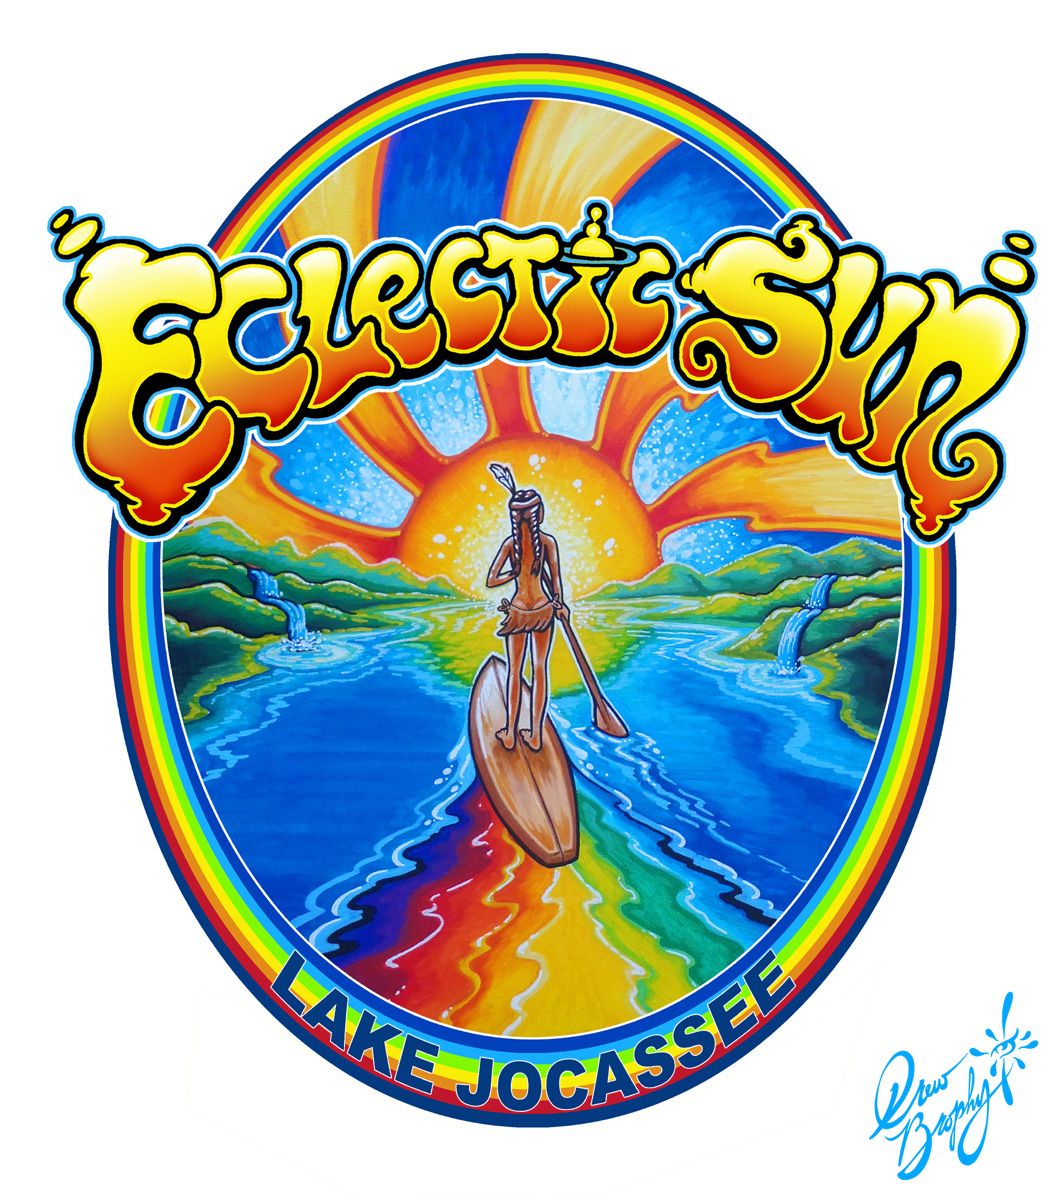 PAINTING STORY: Maiden of Lake Jocassee and Eclectic Sun - Drew Brophy ...